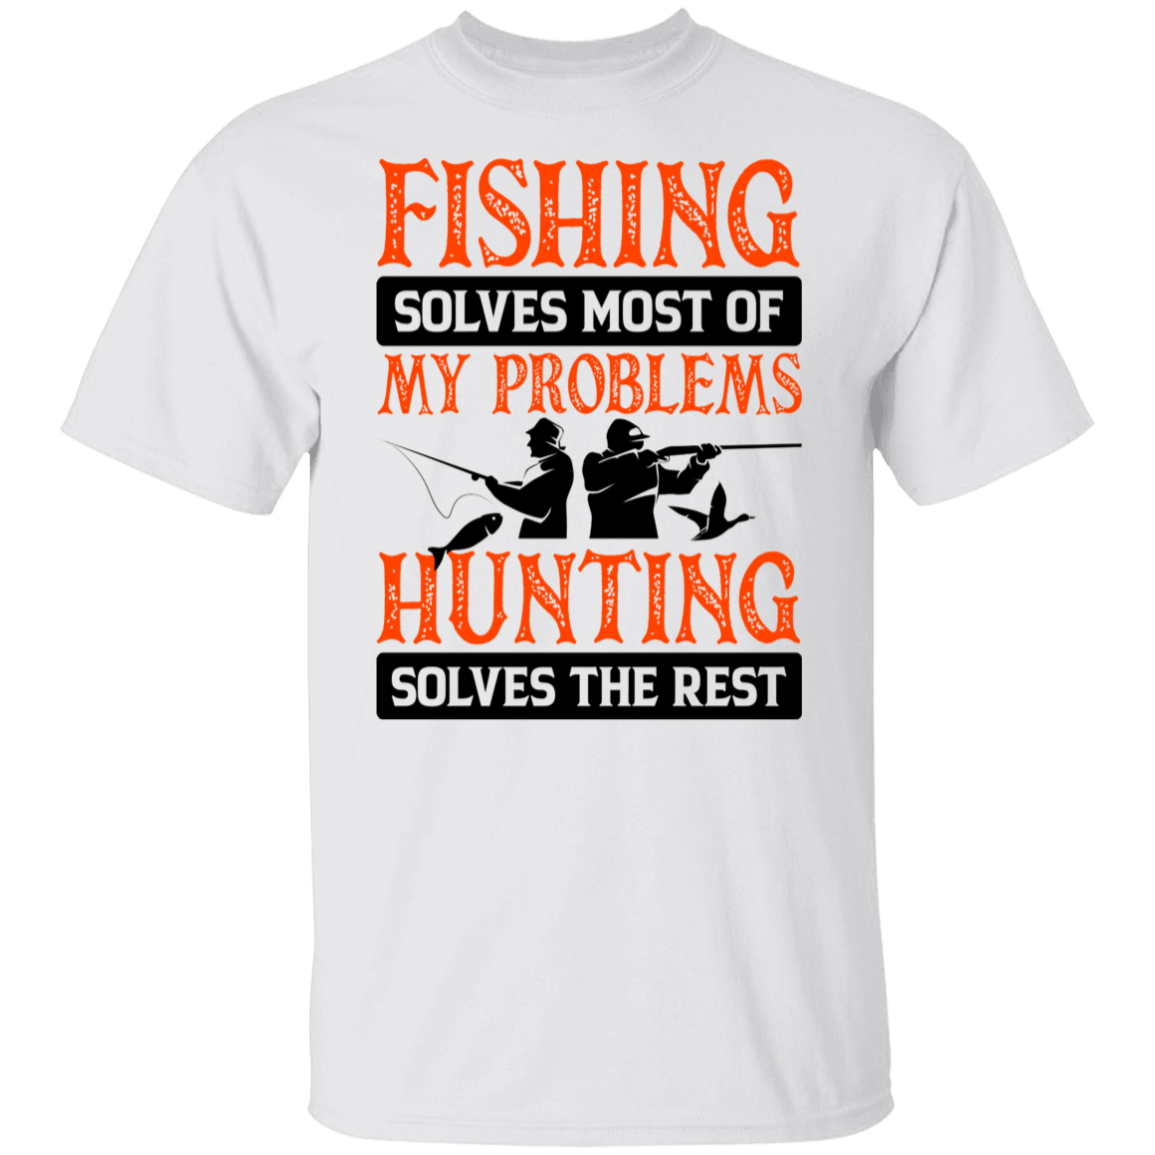 Fishing Solves Most Of My Problems T-Shirt